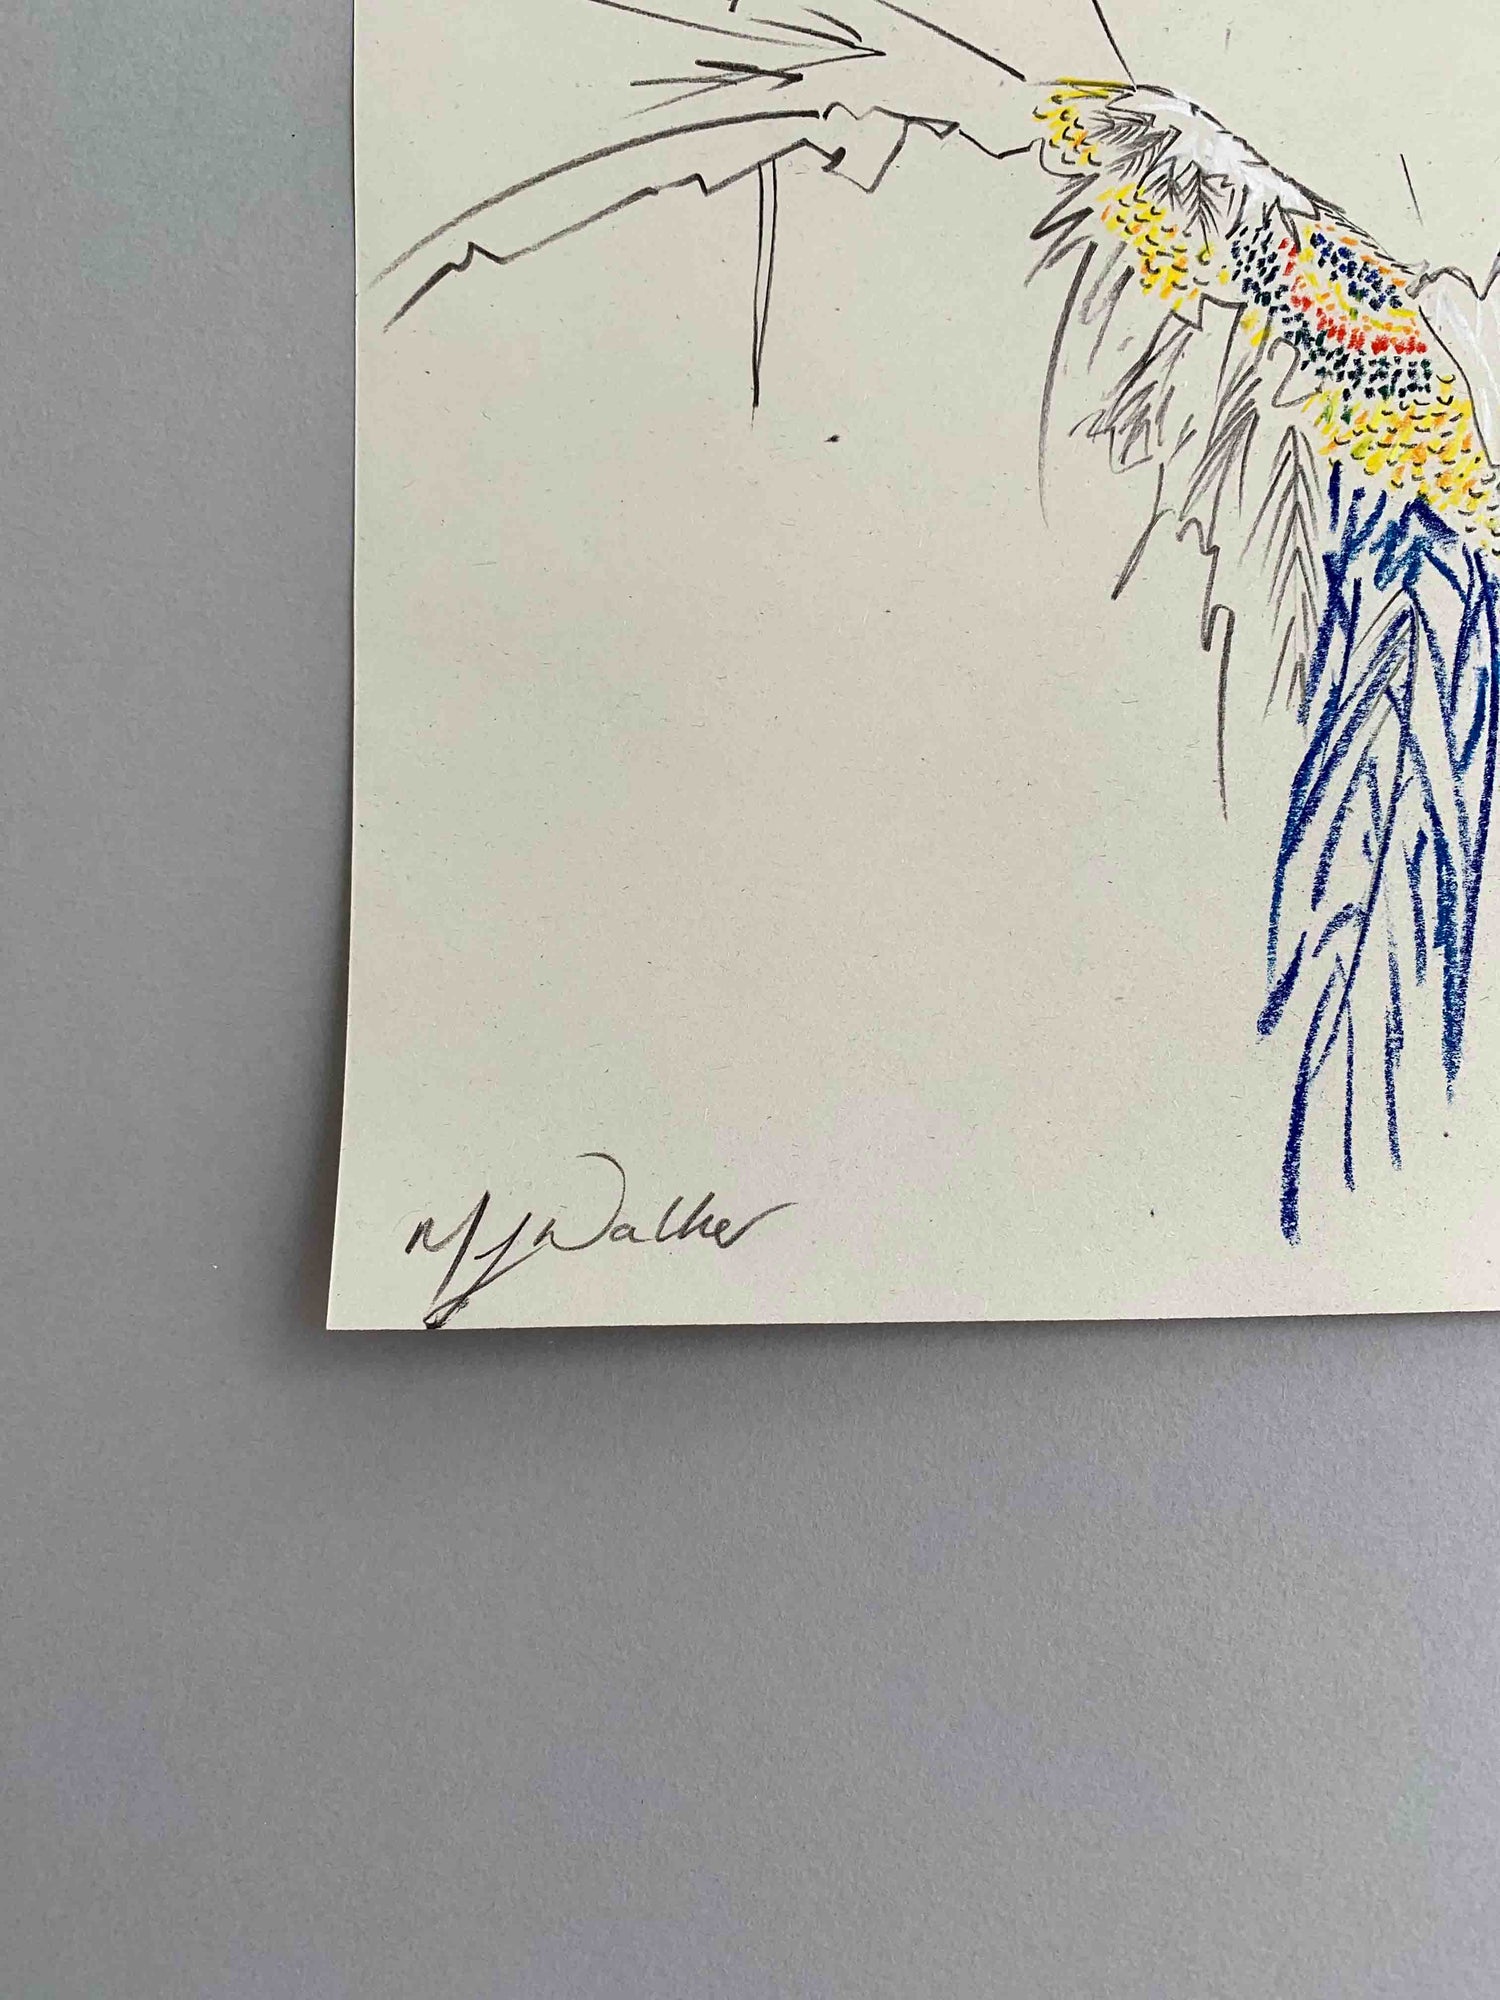 Fashion designer, Melanie Walker's signature on the bottom of her print 'Thierry Mugler Butterfly Dress'.